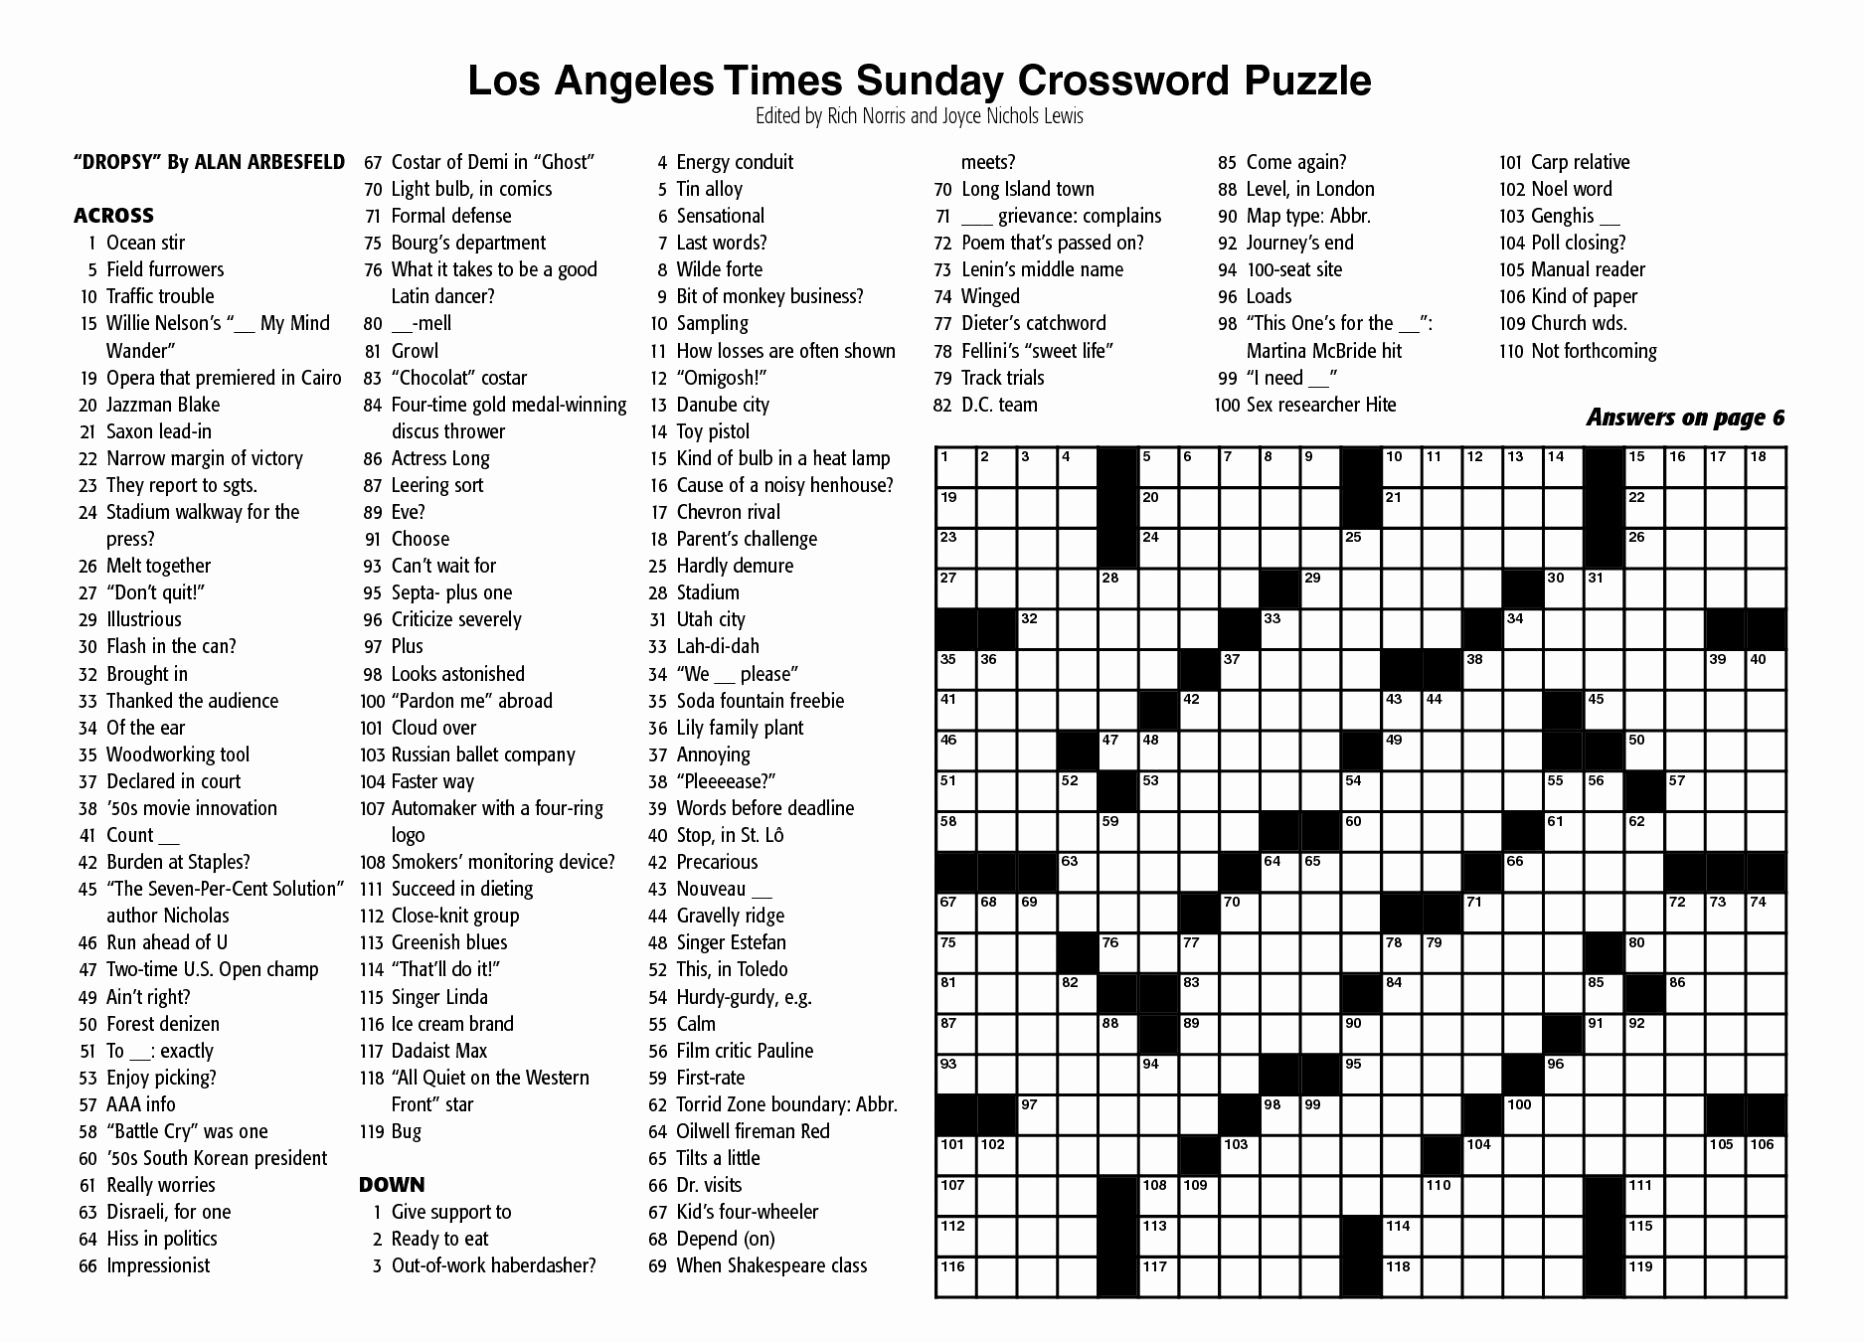 Shuck It NYT Crossword: Unraveling the Puzzle #39 s Enigmatic Charm